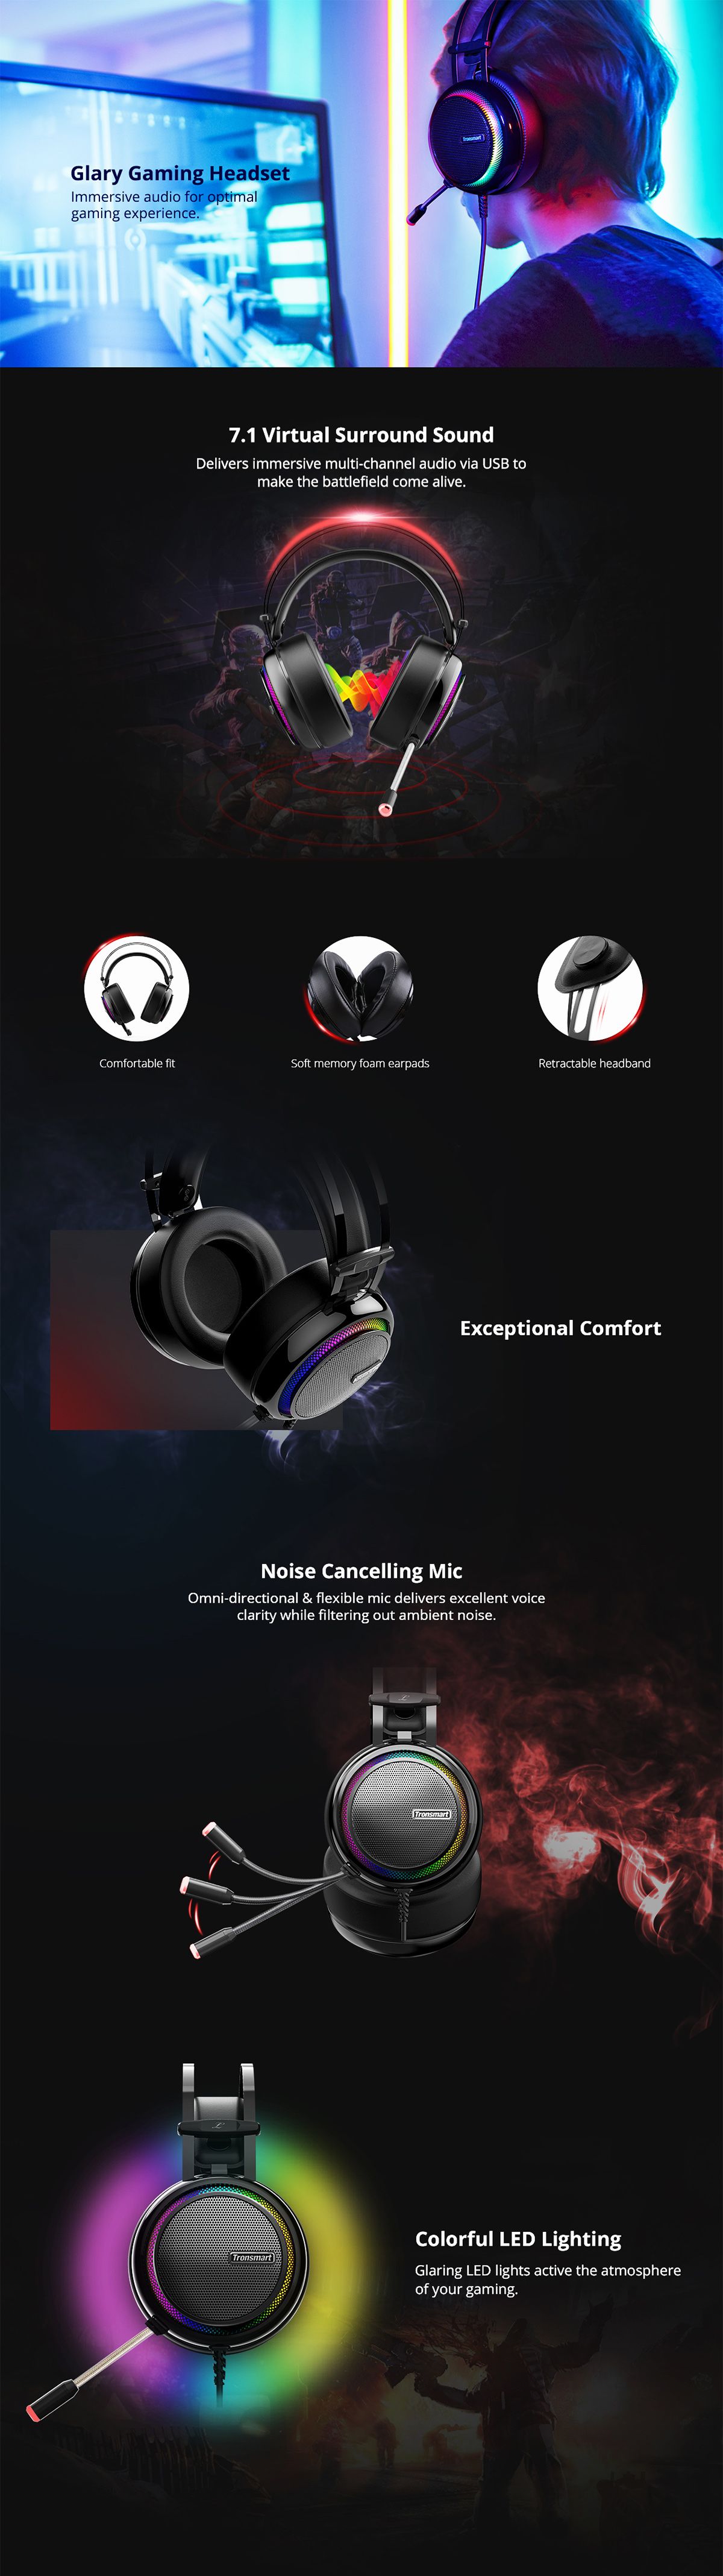 Tronsmart-Glary-Gaming-Headset-with-71-Virtual-Surround-Sound-USB-Interface-Gaming-Headphones-for-Xb-1666605